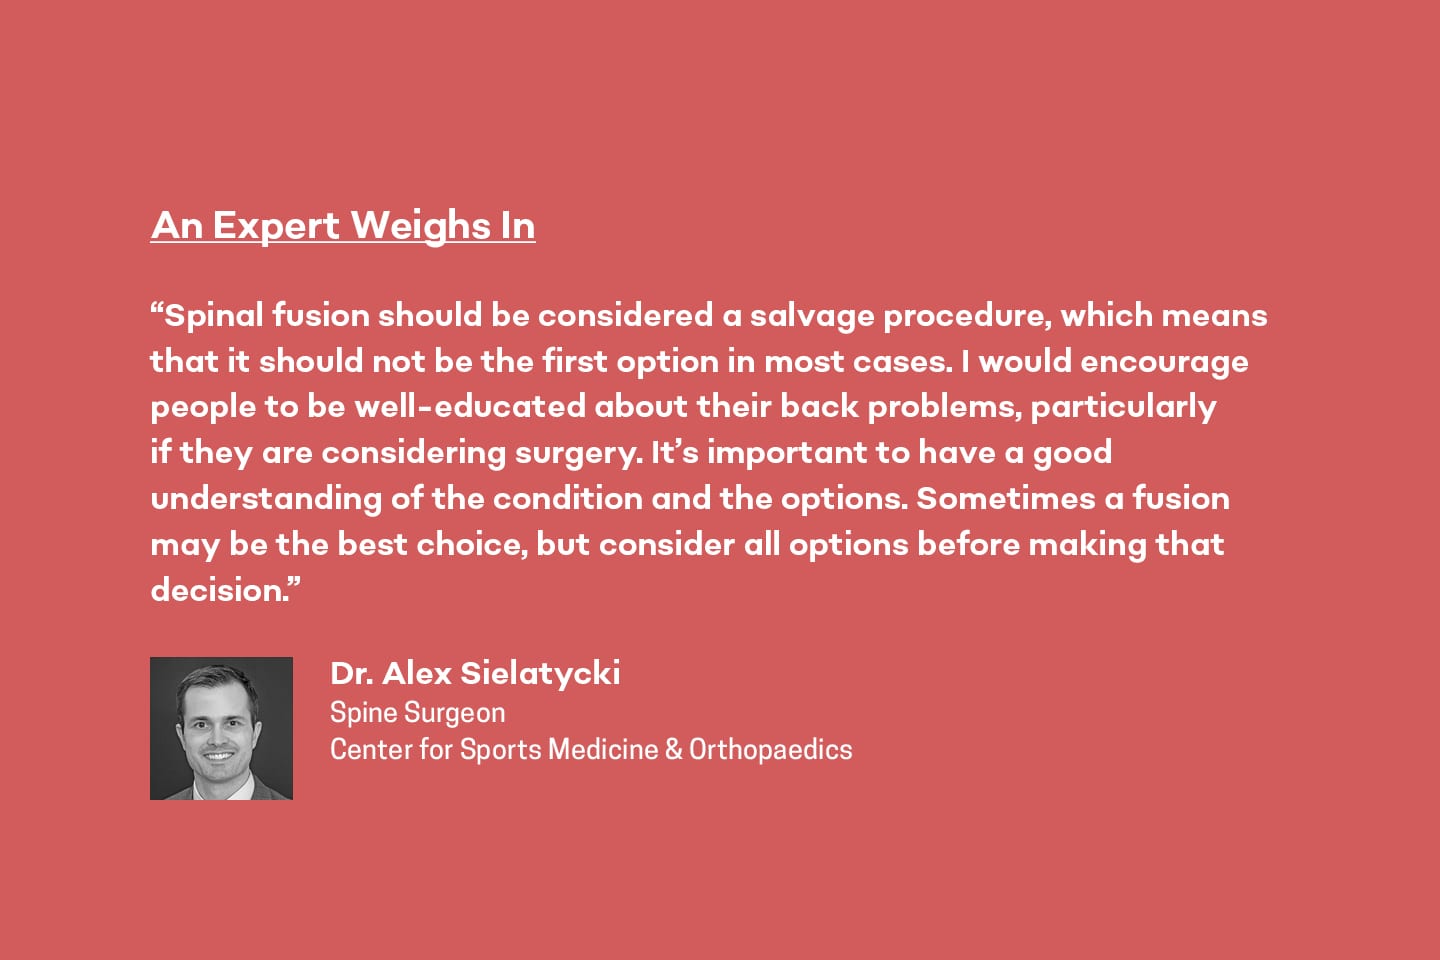 expert advice on alternatives to spinal fusion